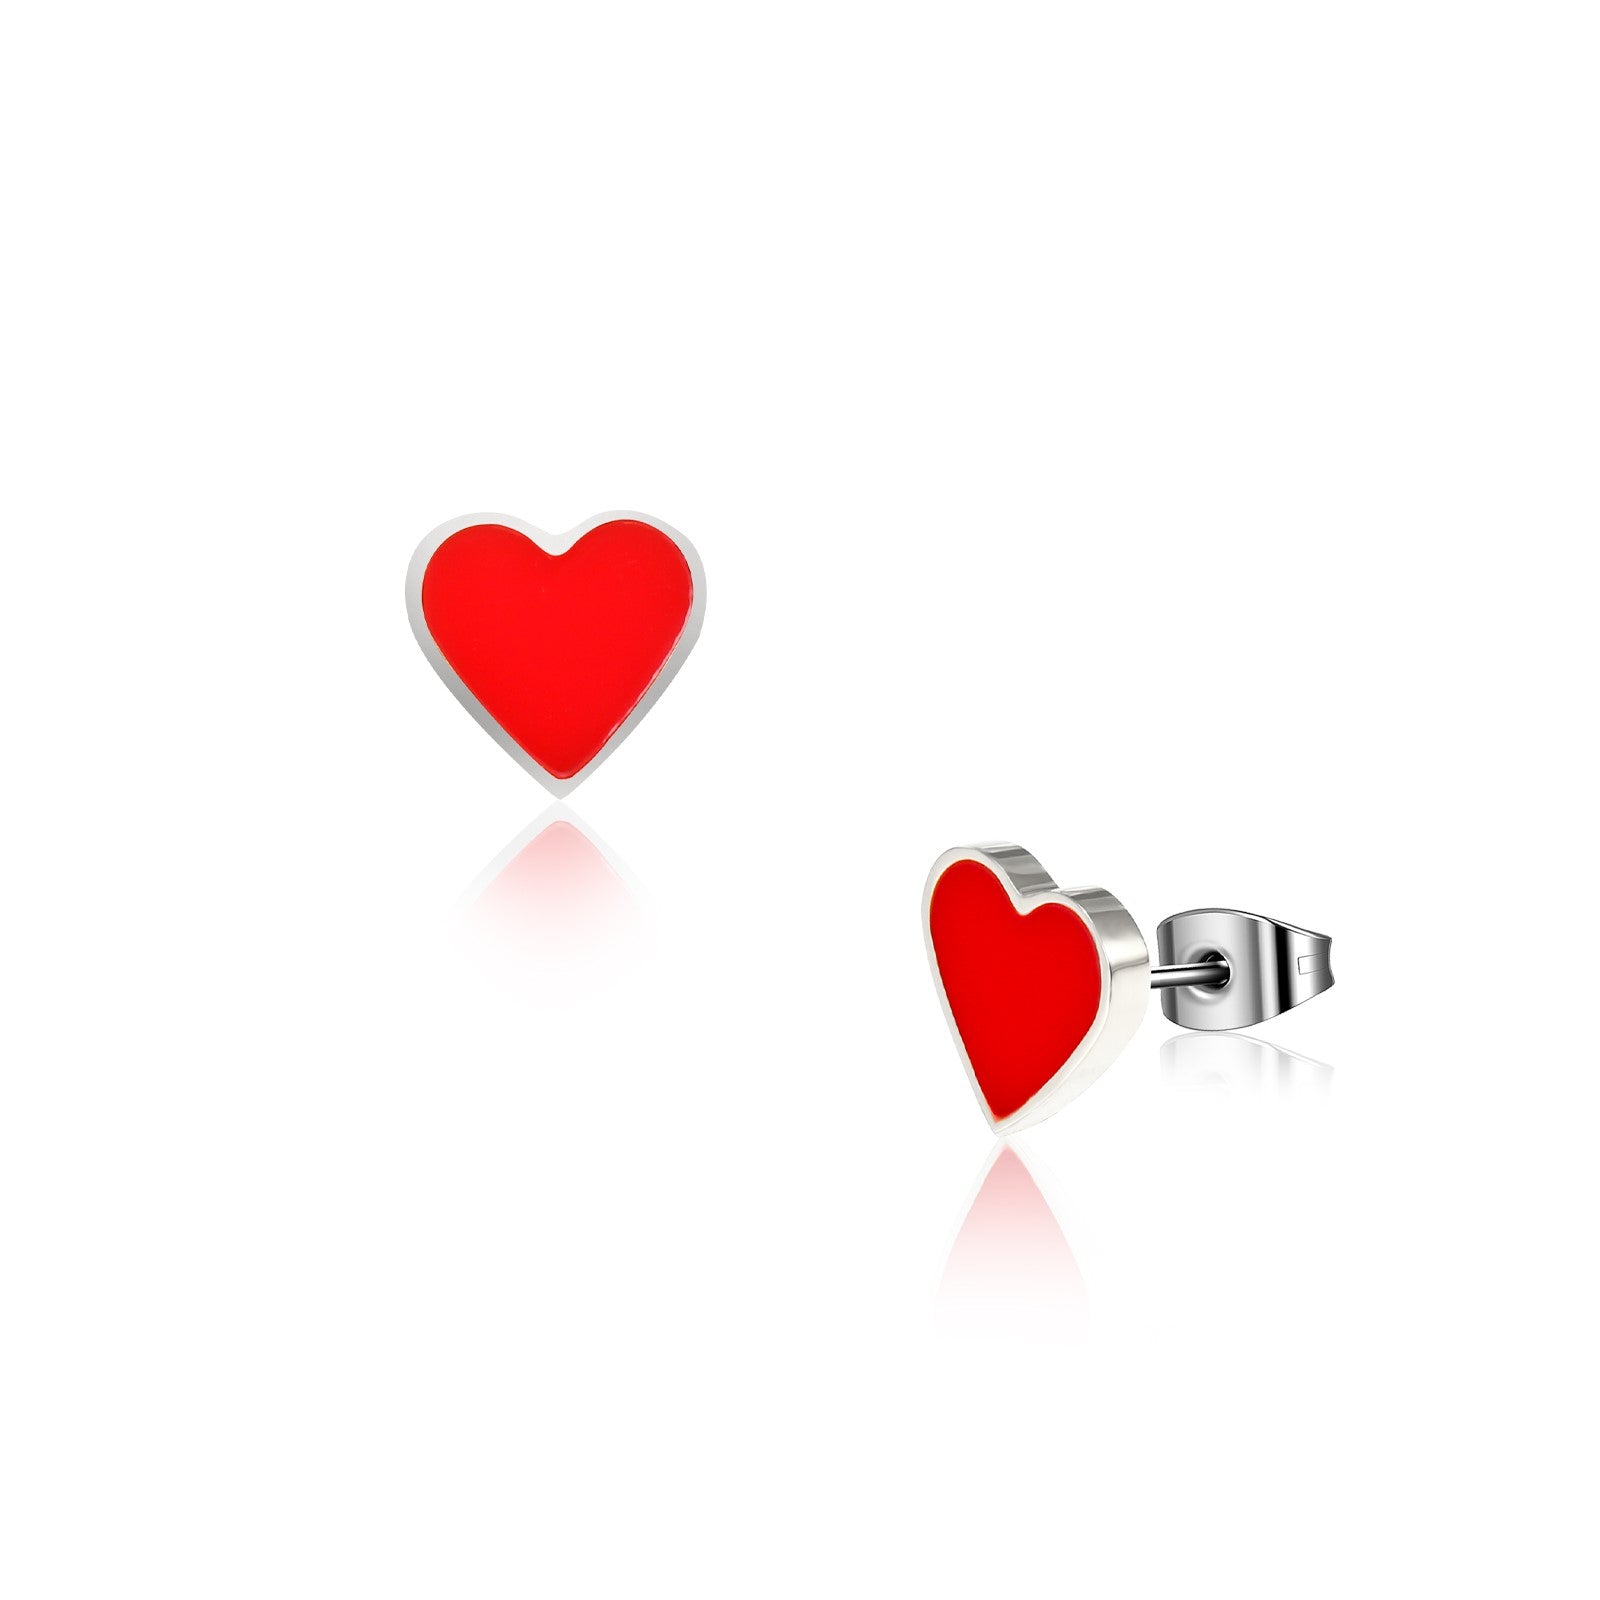 Red heart studs -solid titanium studs and backs- Feature a small and minimal design on a white background